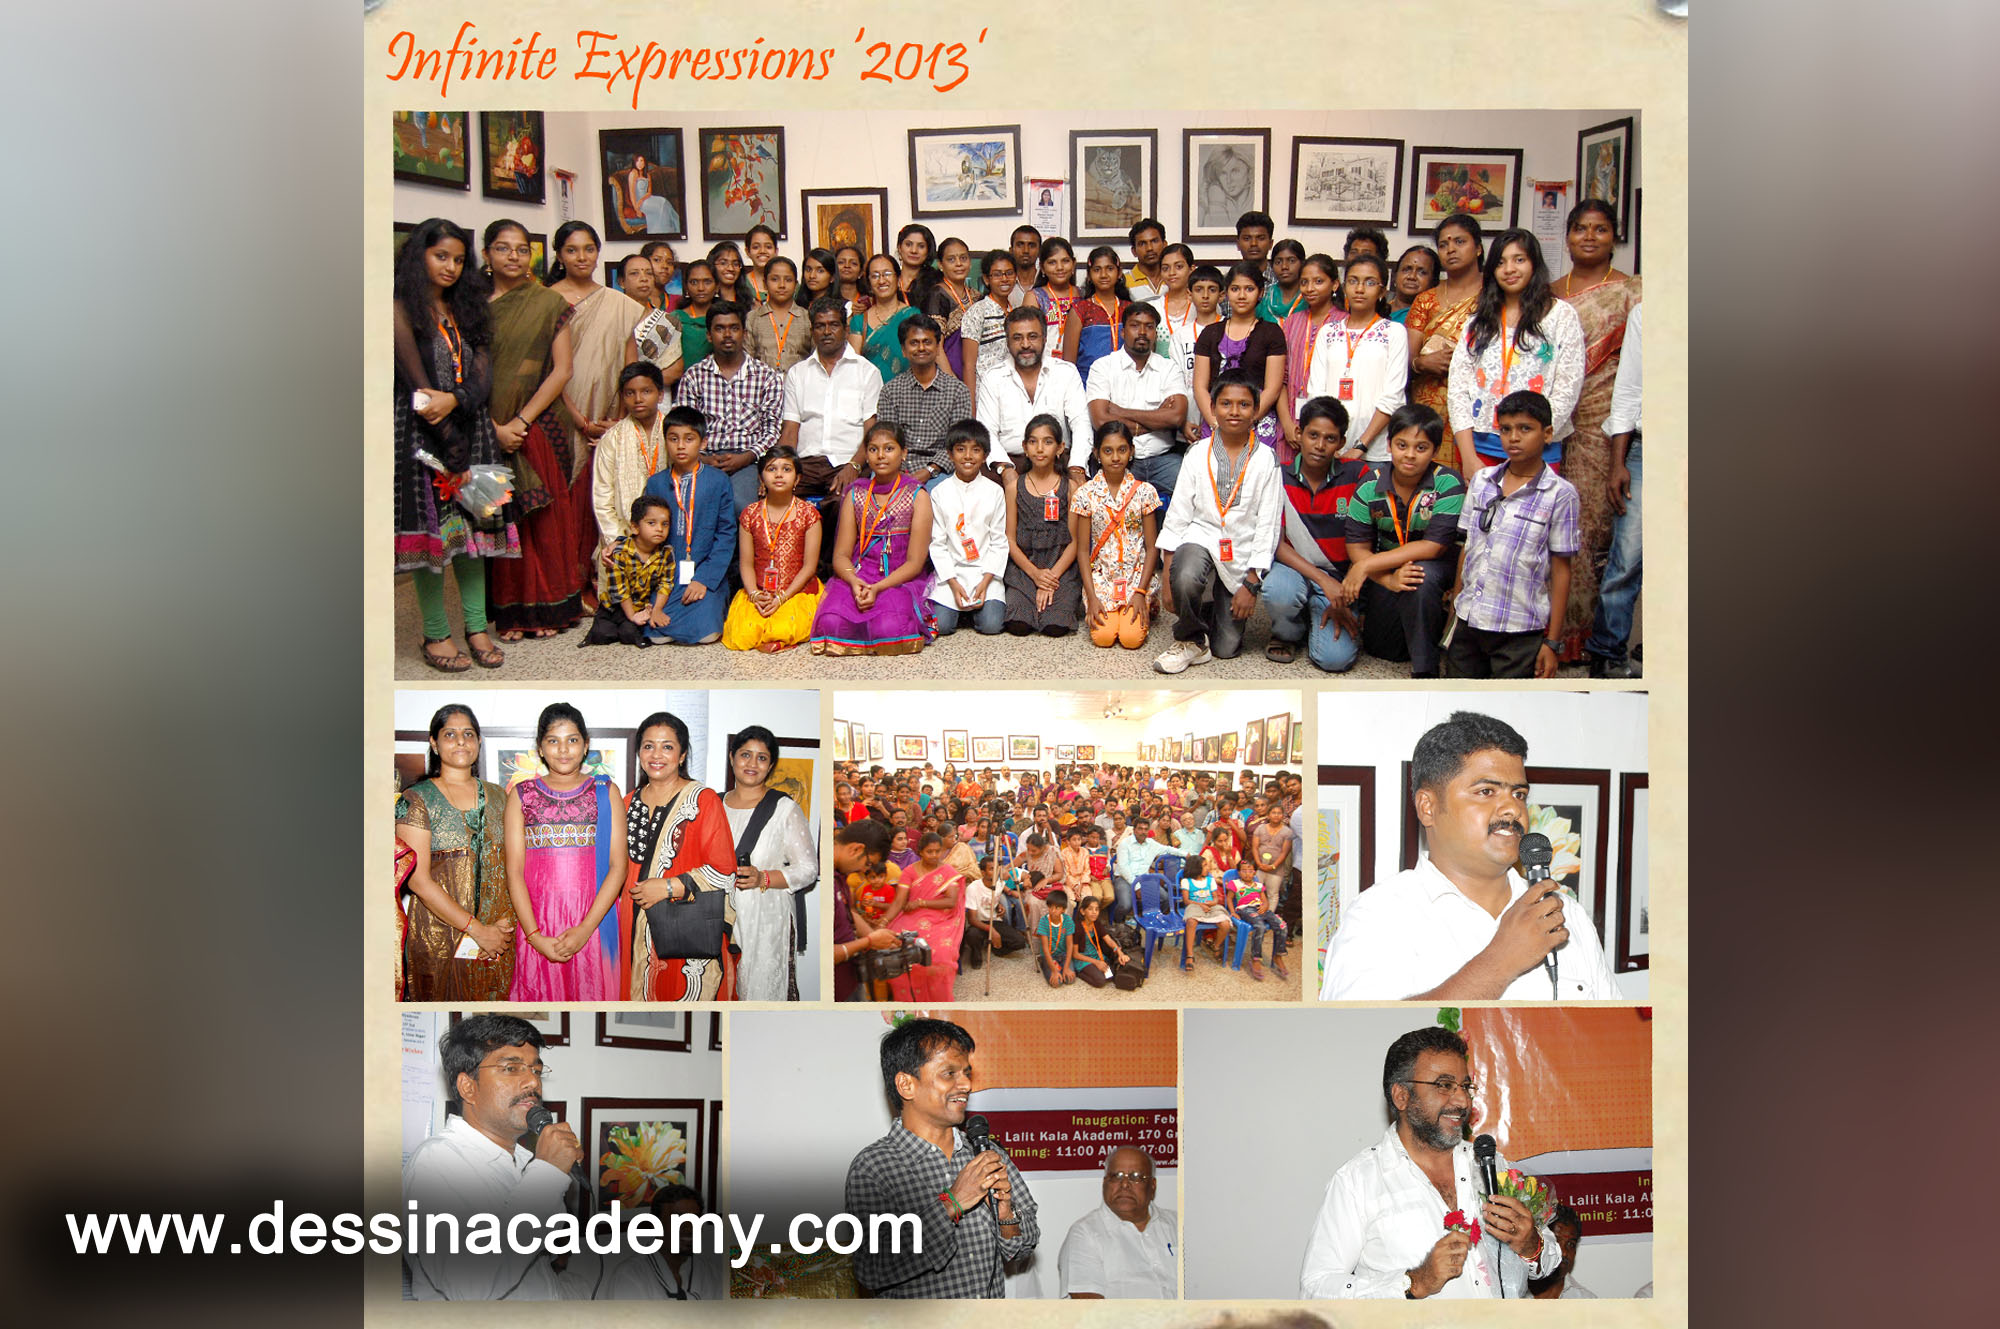 Dessin School of Arts Event Gallery 3, Drawing Coaching in ChennaiDessin School of Arts